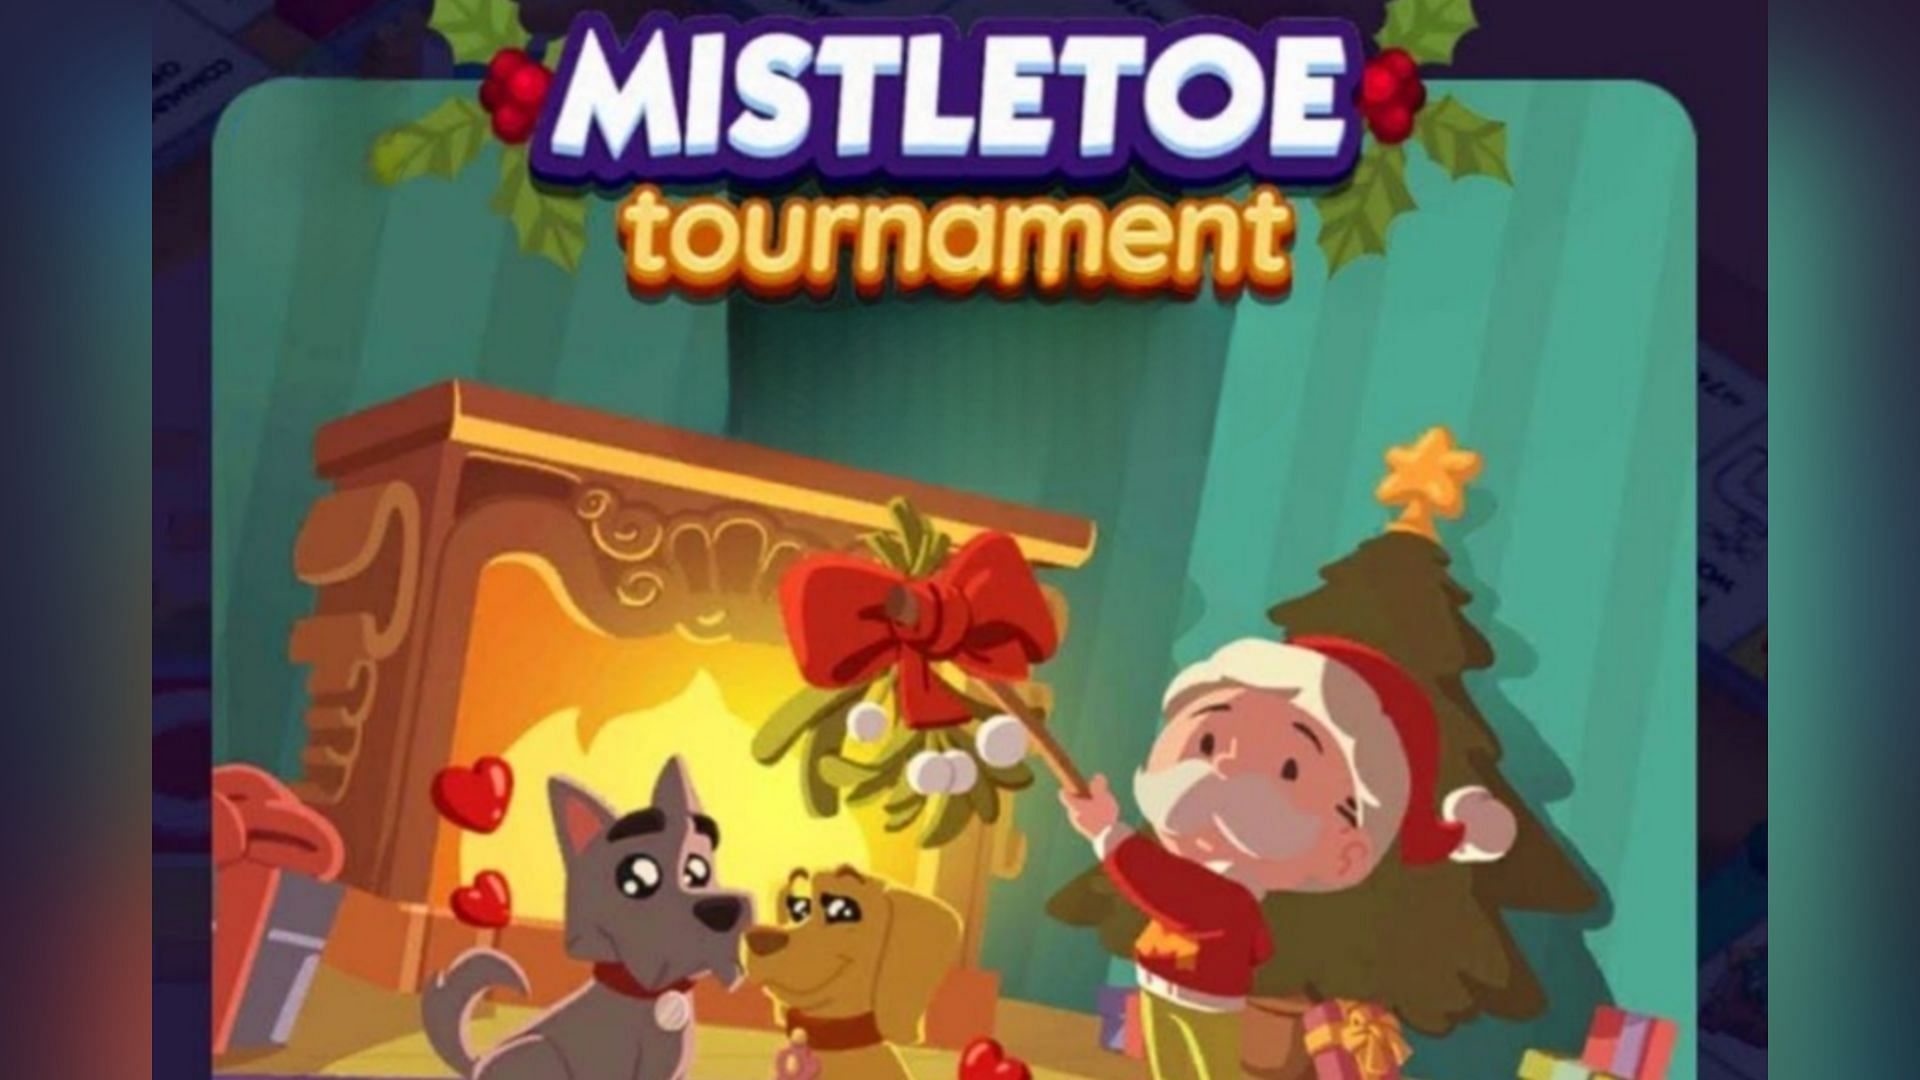 Monopoly Go players can get great rewards from the ongoing Mistletoe Tournament (Image via Scopely) 